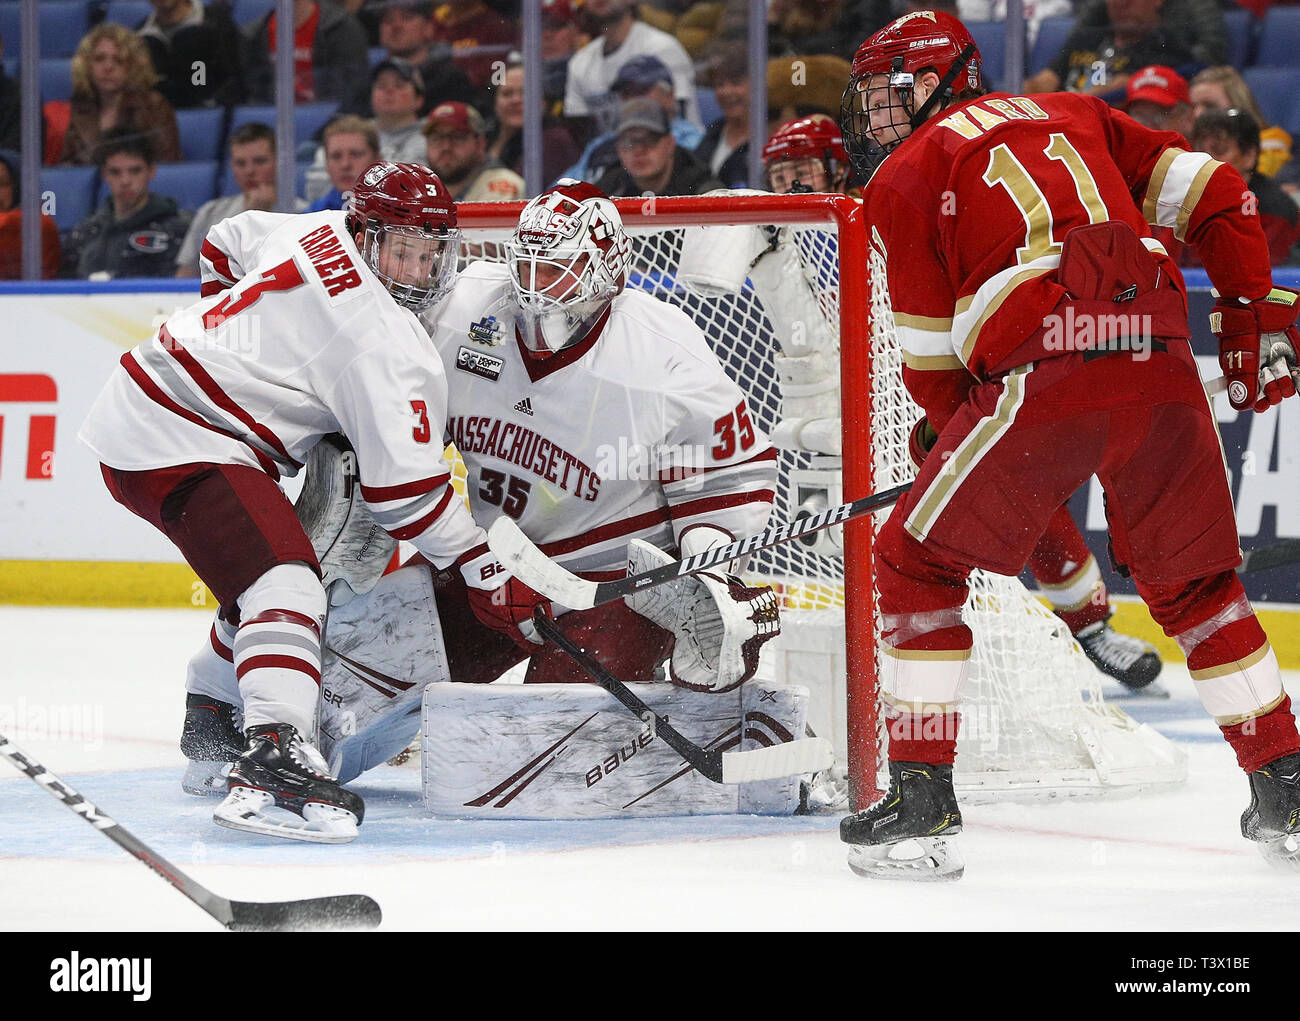 Buffalo, NY, USA. 11th Apr 2019. Massachusetts Minutemen defenseman Ty Farmer (3) assists goaltender Filip Lindberg (35) in front of the net with Denver Pioneers forward Tyler Ward (11) looking for a rebound during the second period of play in the 2019 NCAA Frozen Four Men's Hockey Semi-Final game between the Denver Pioneers and Massachusetts Minutemen at the KeyBank Center in Buffalo, N.Y. (Nicholas T. LoVerde/Cal Sport Media) Credit: Cal Sport Media/Alamy Live News Stock Photo